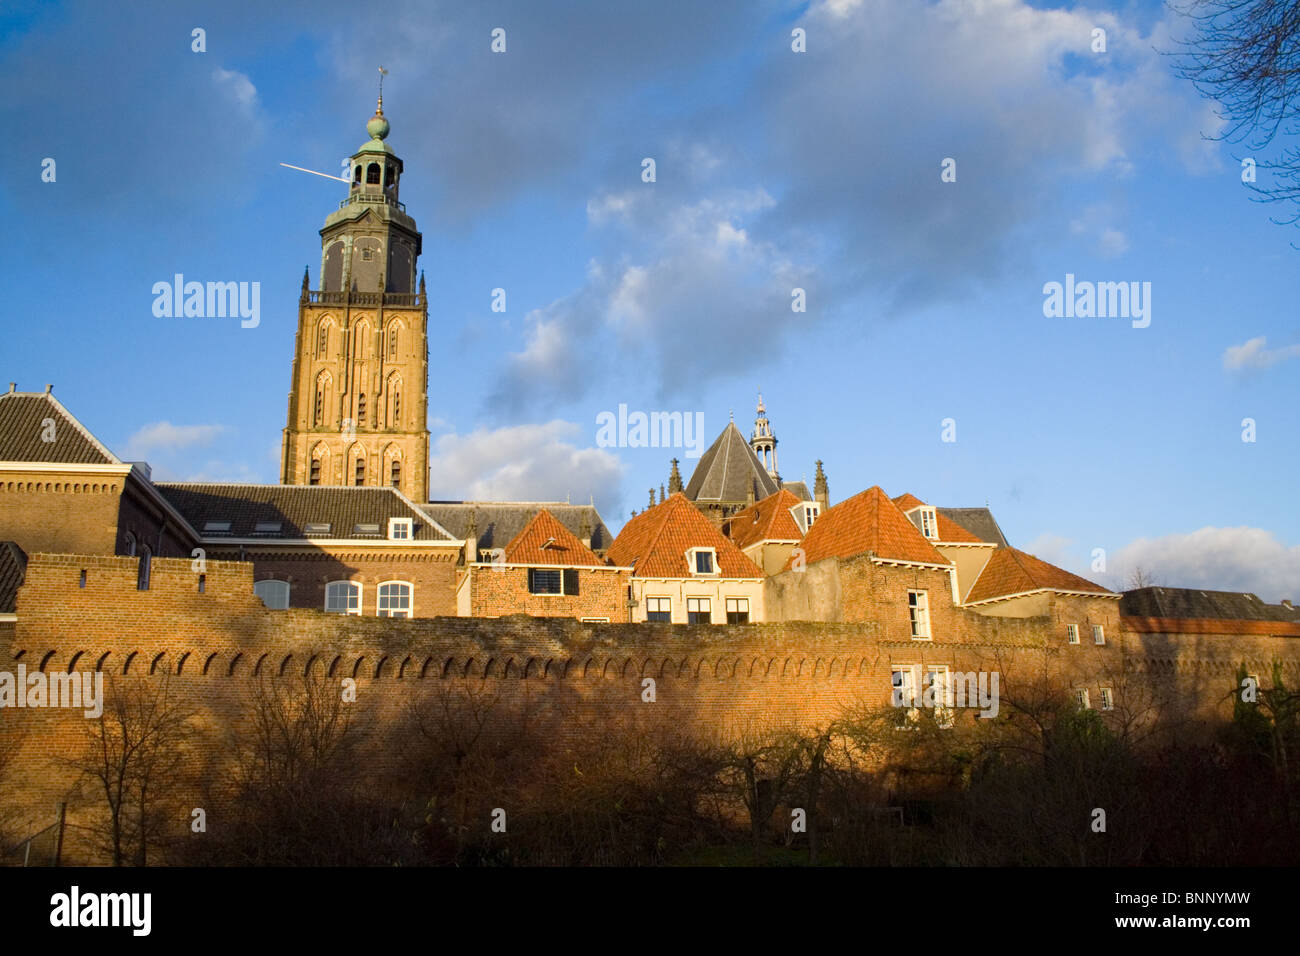 Historic town of Zutphen, The Netherlands Stock Photo